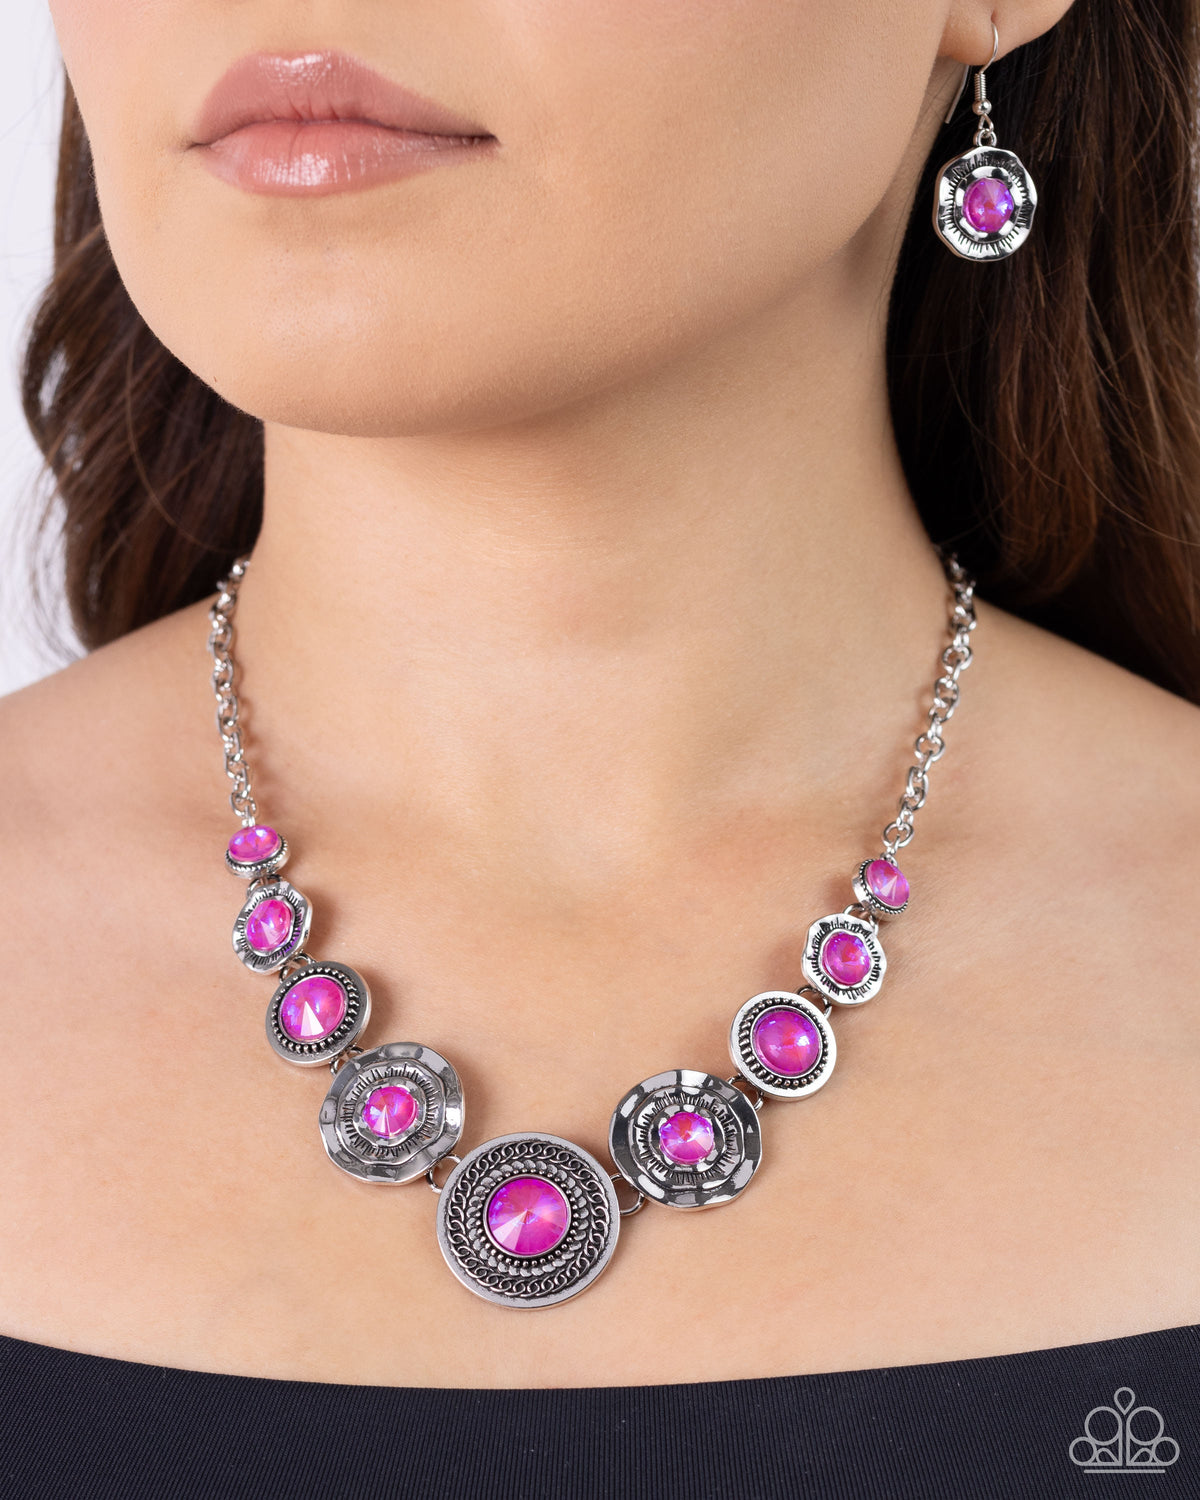 Treasure Chest Couture Pink UV Shimmer Rhinestone Necklace - Paparazzi Accessories-on model - CarasShop.com - $5 Jewelry by Cara Jewels